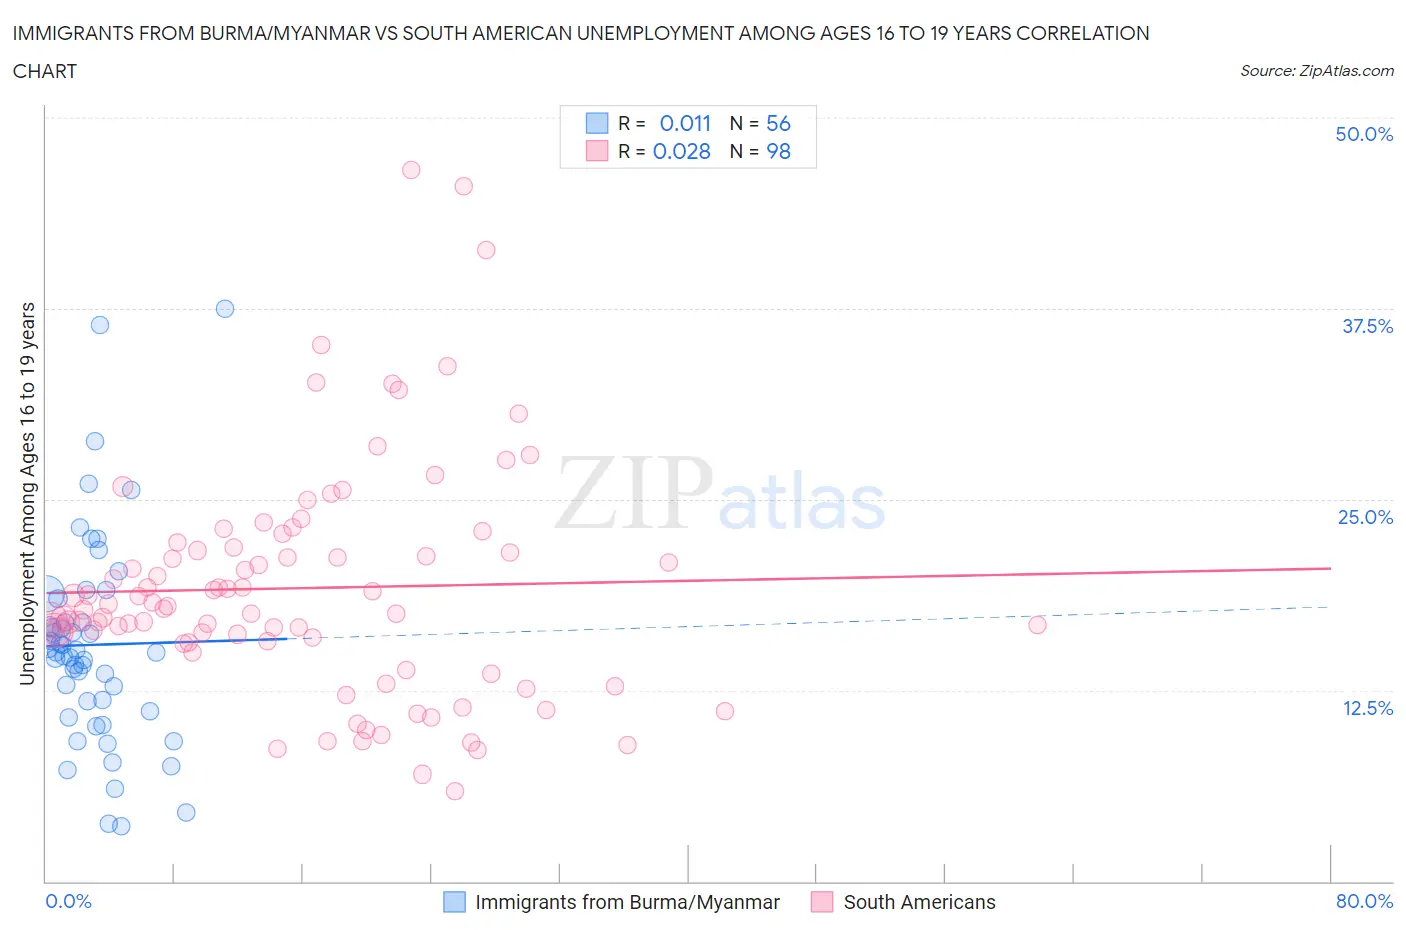 Immigrants from Burma/Myanmar vs South American Unemployment Among Ages 16 to 19 years